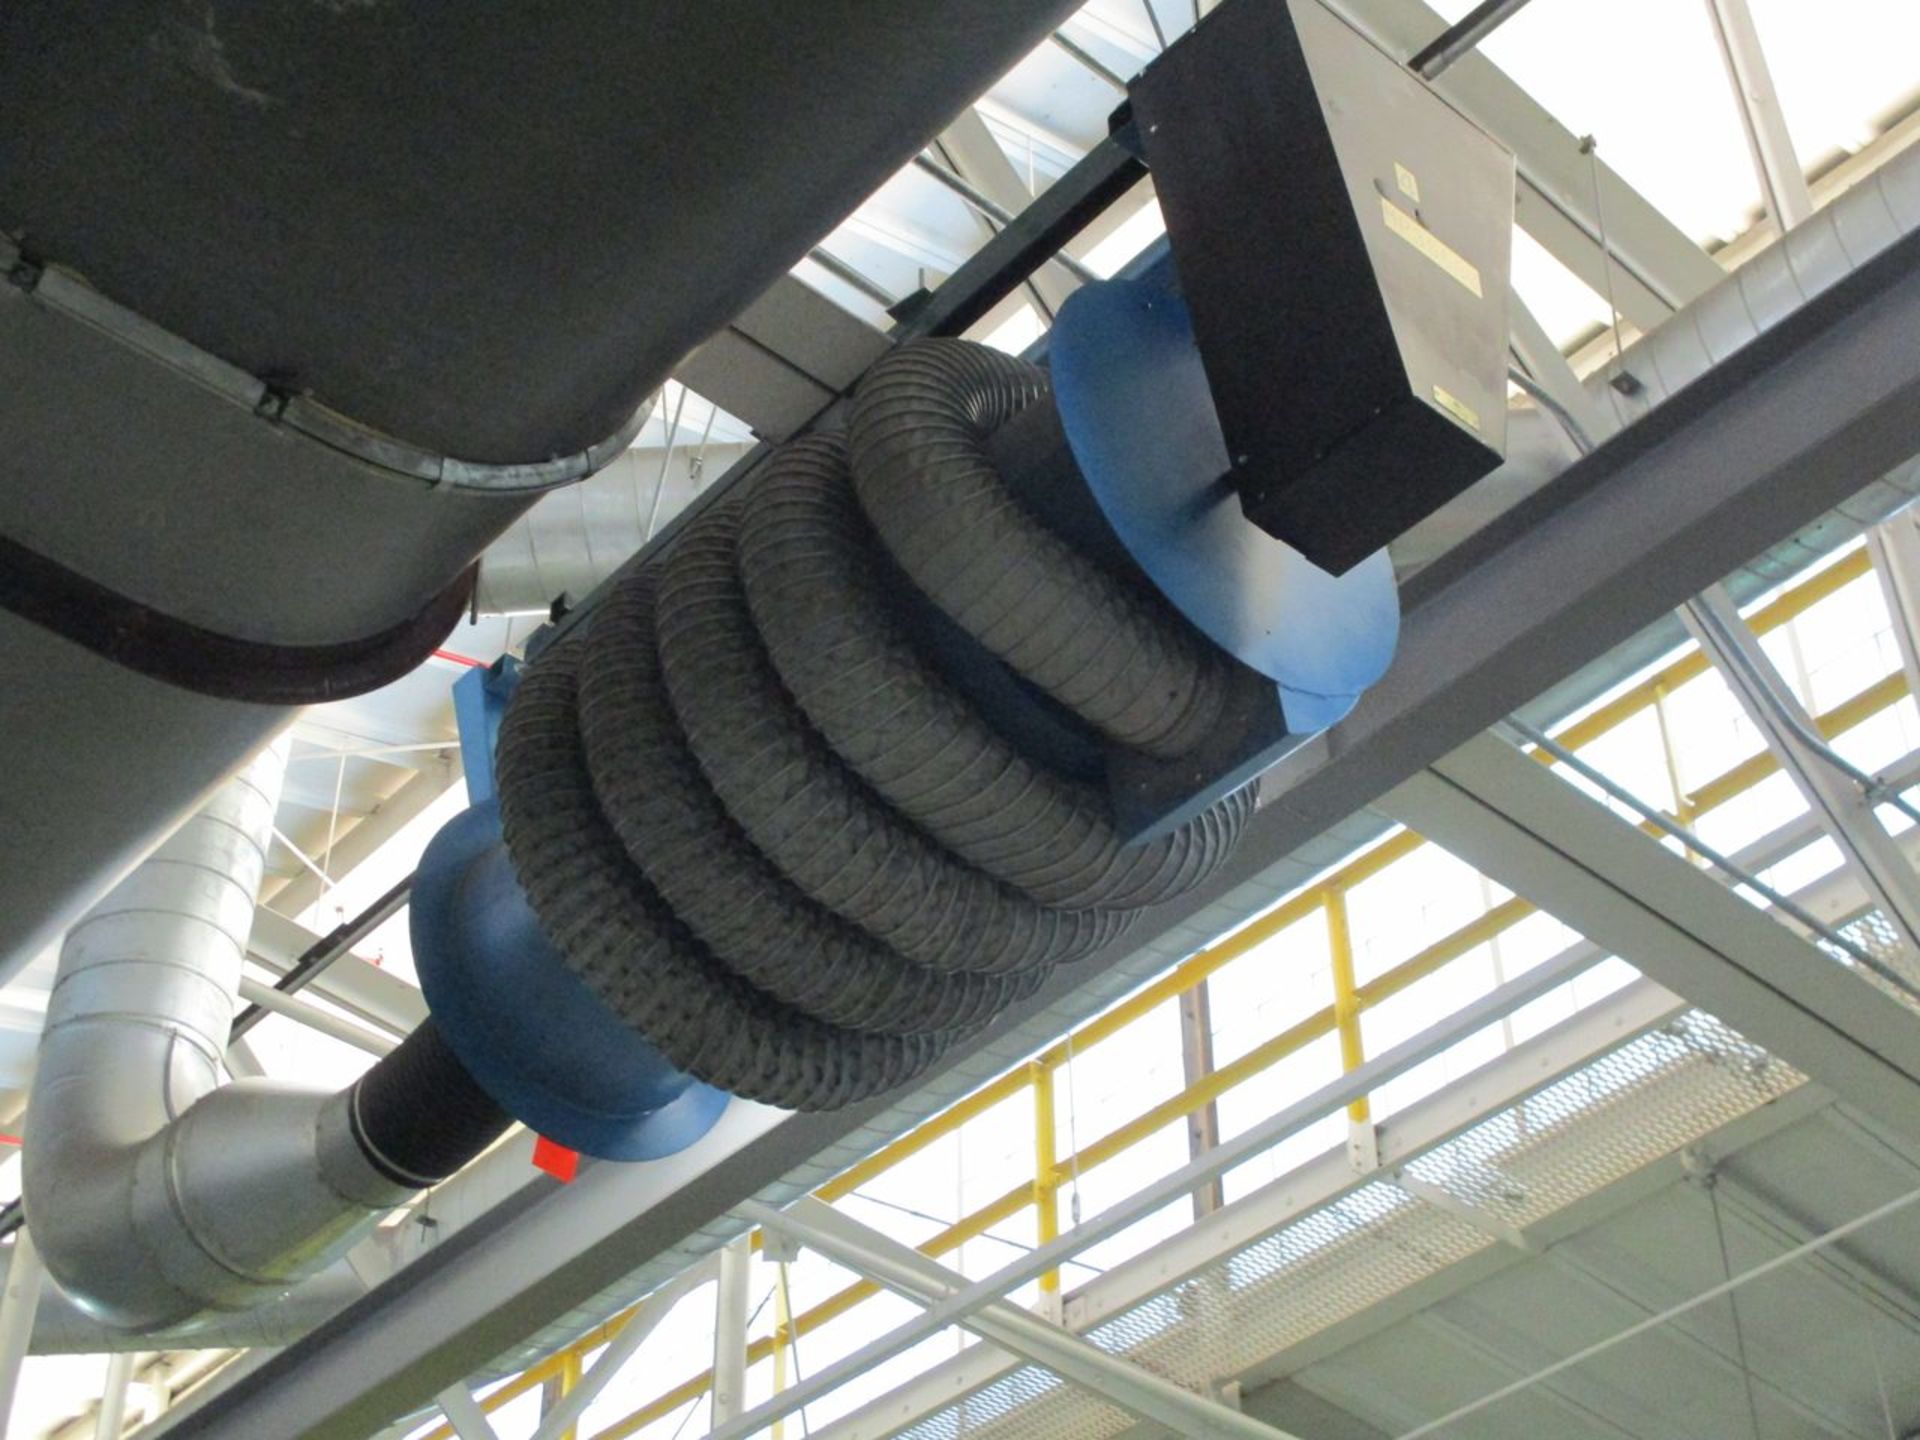 (2) Car-Mon Spring Operated Exhaust Tubing Storage Reel, model TSR-S (Ceiling Mounted) (Chassis Dyno - Image 2 of 2